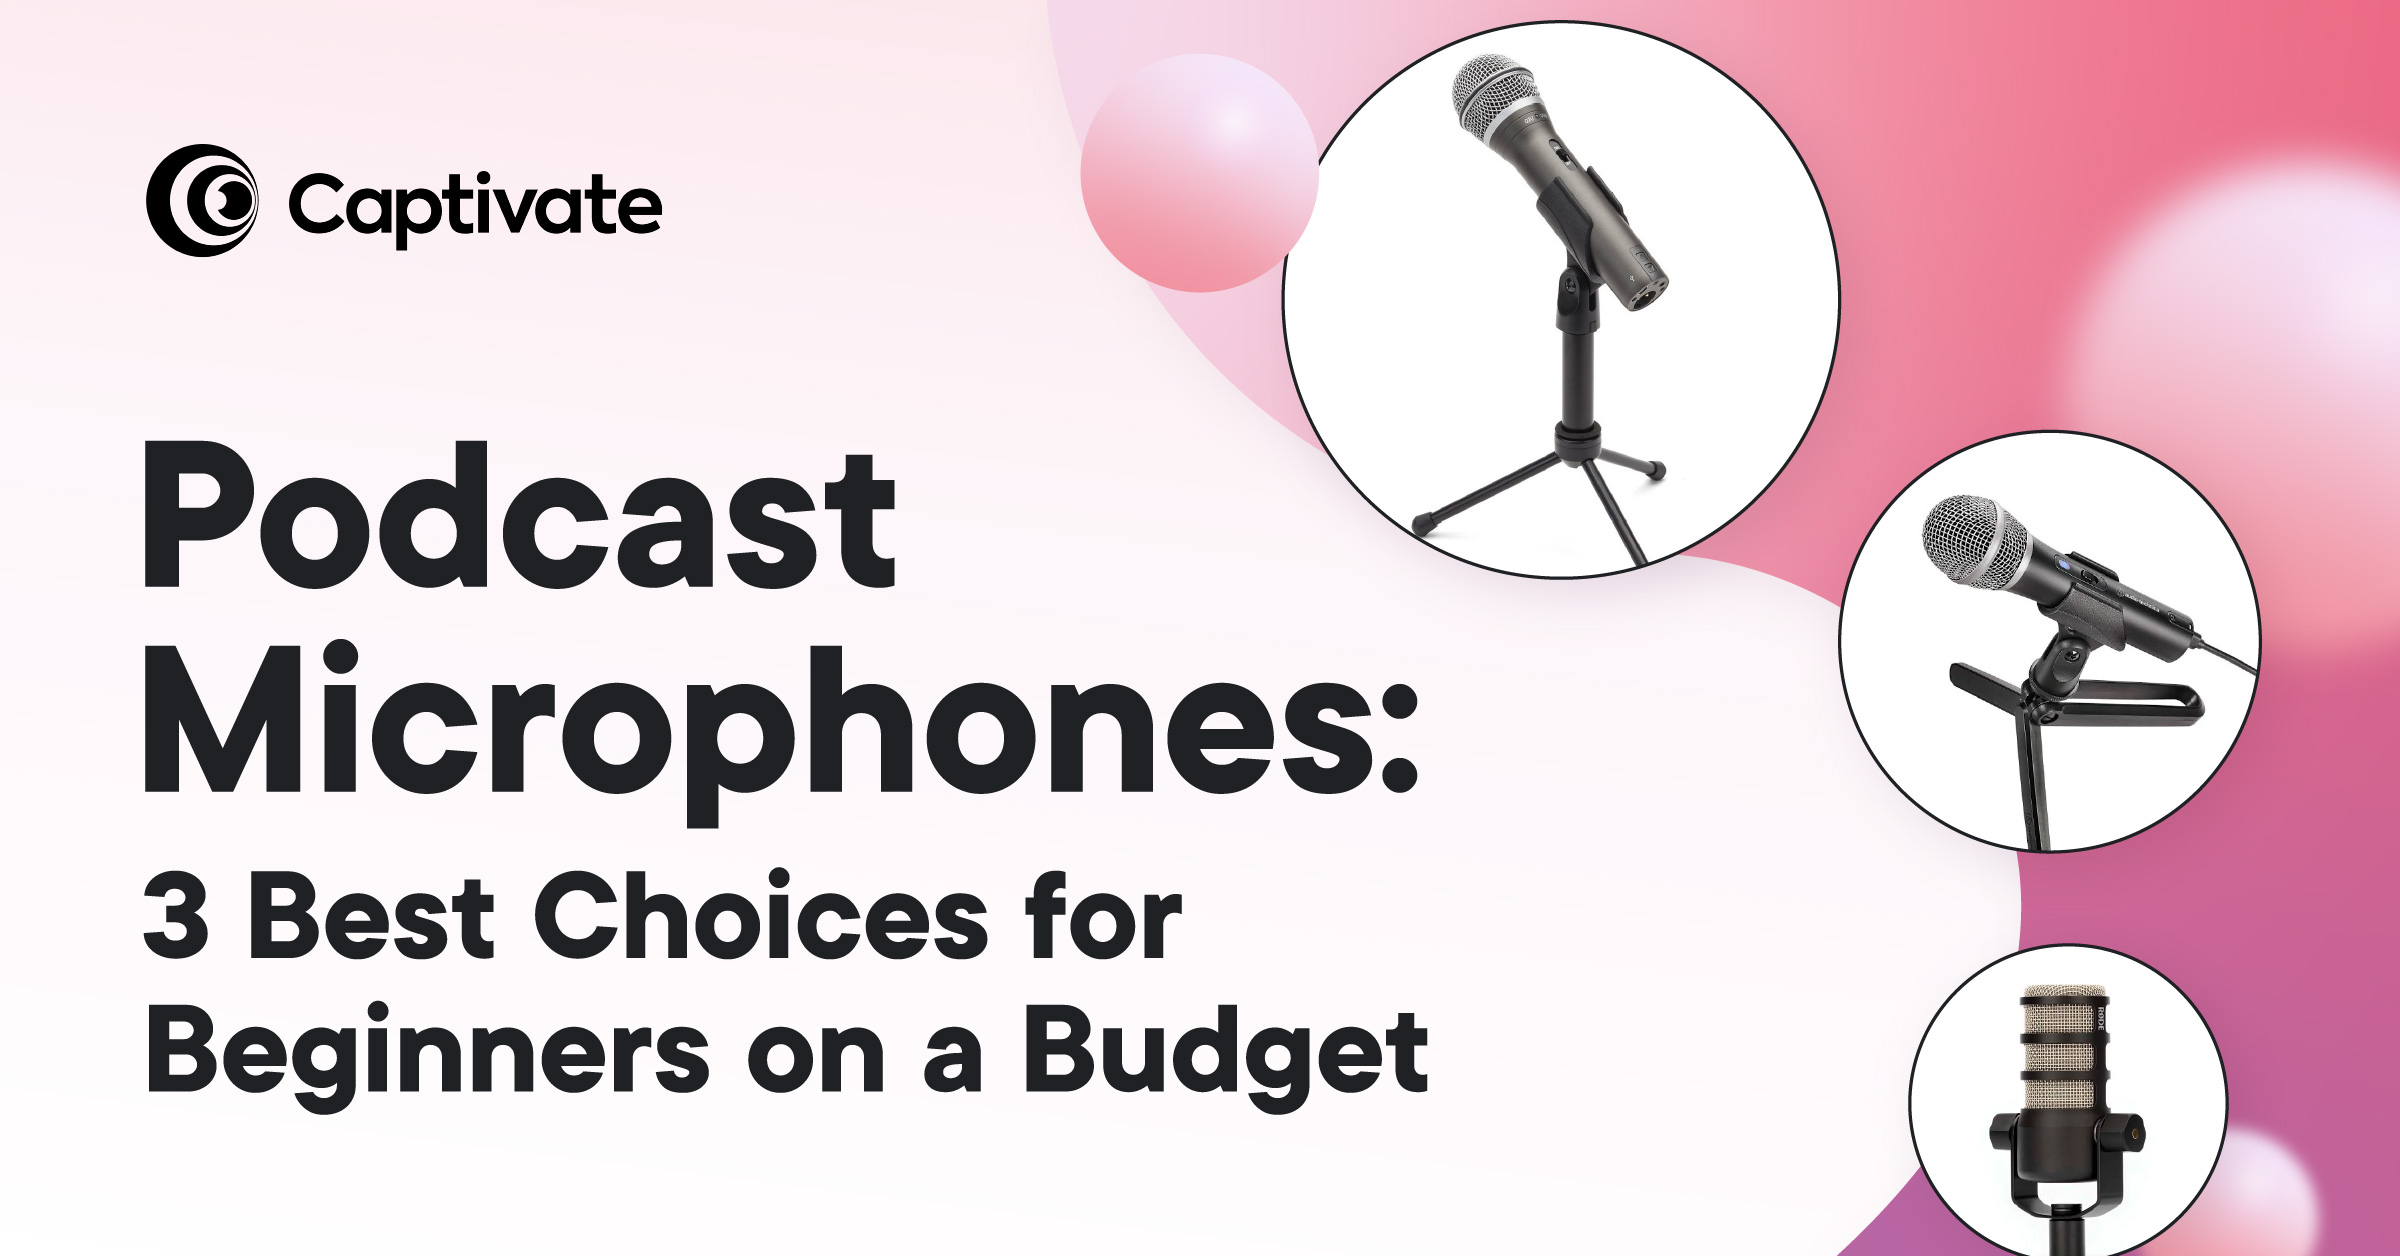 Podcast Microphones: Top 3 Choices for Beginners